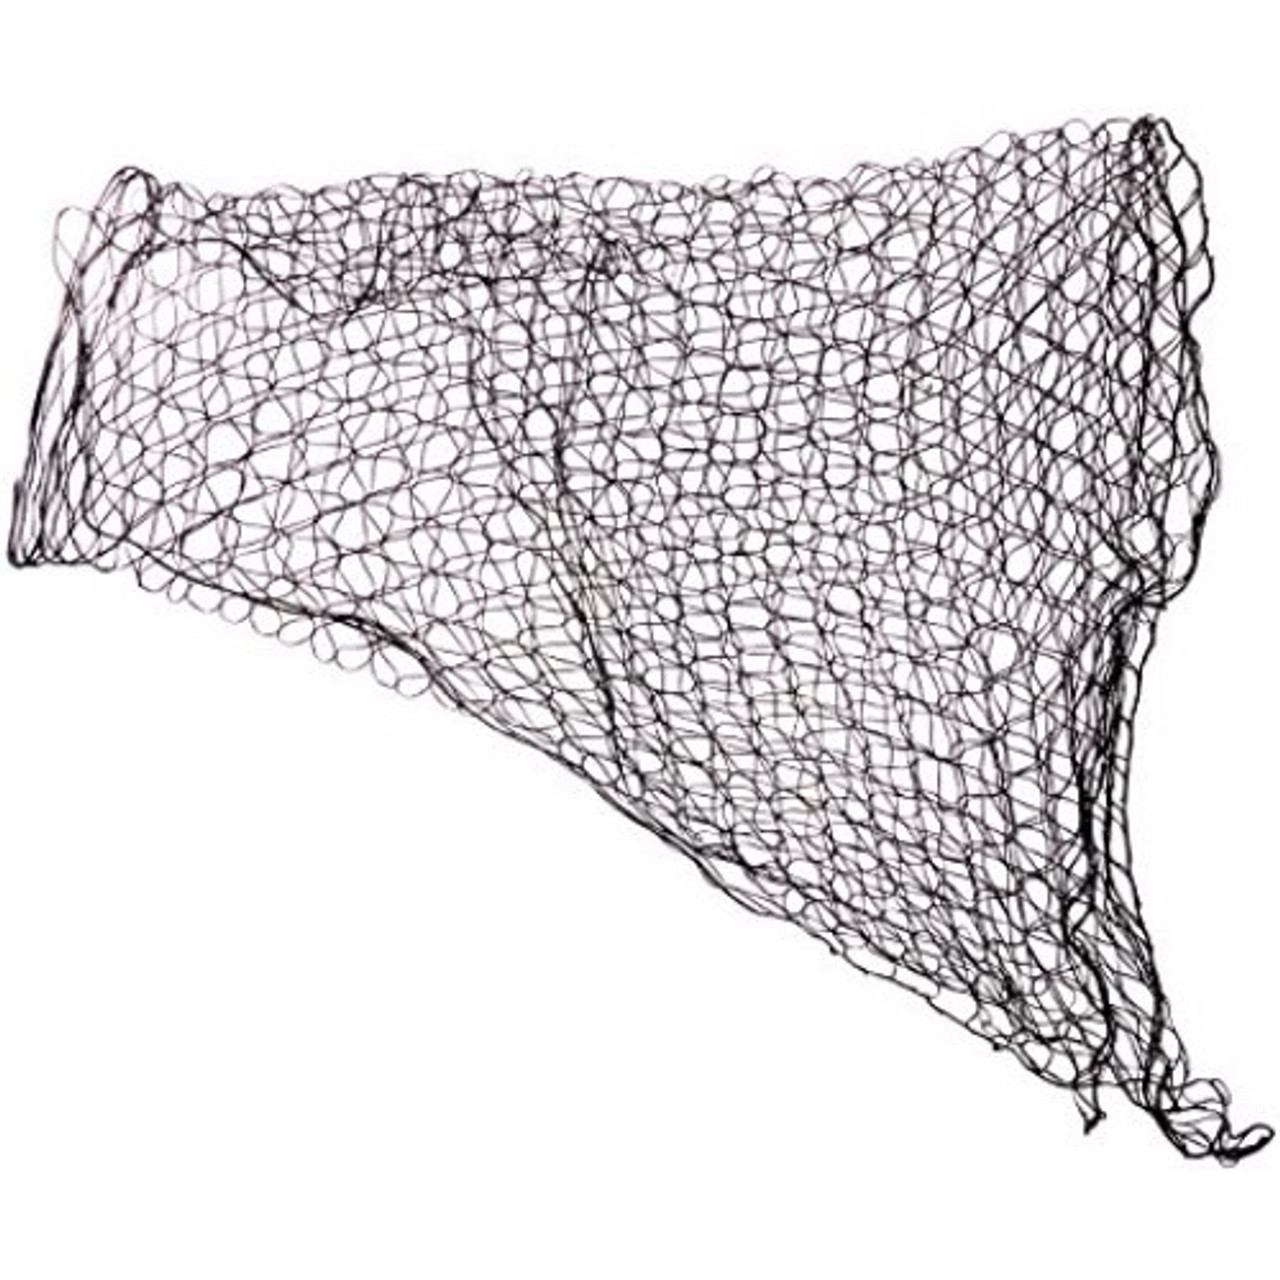 Accessories Fishing Nets, Replacement Fishing Net Bags